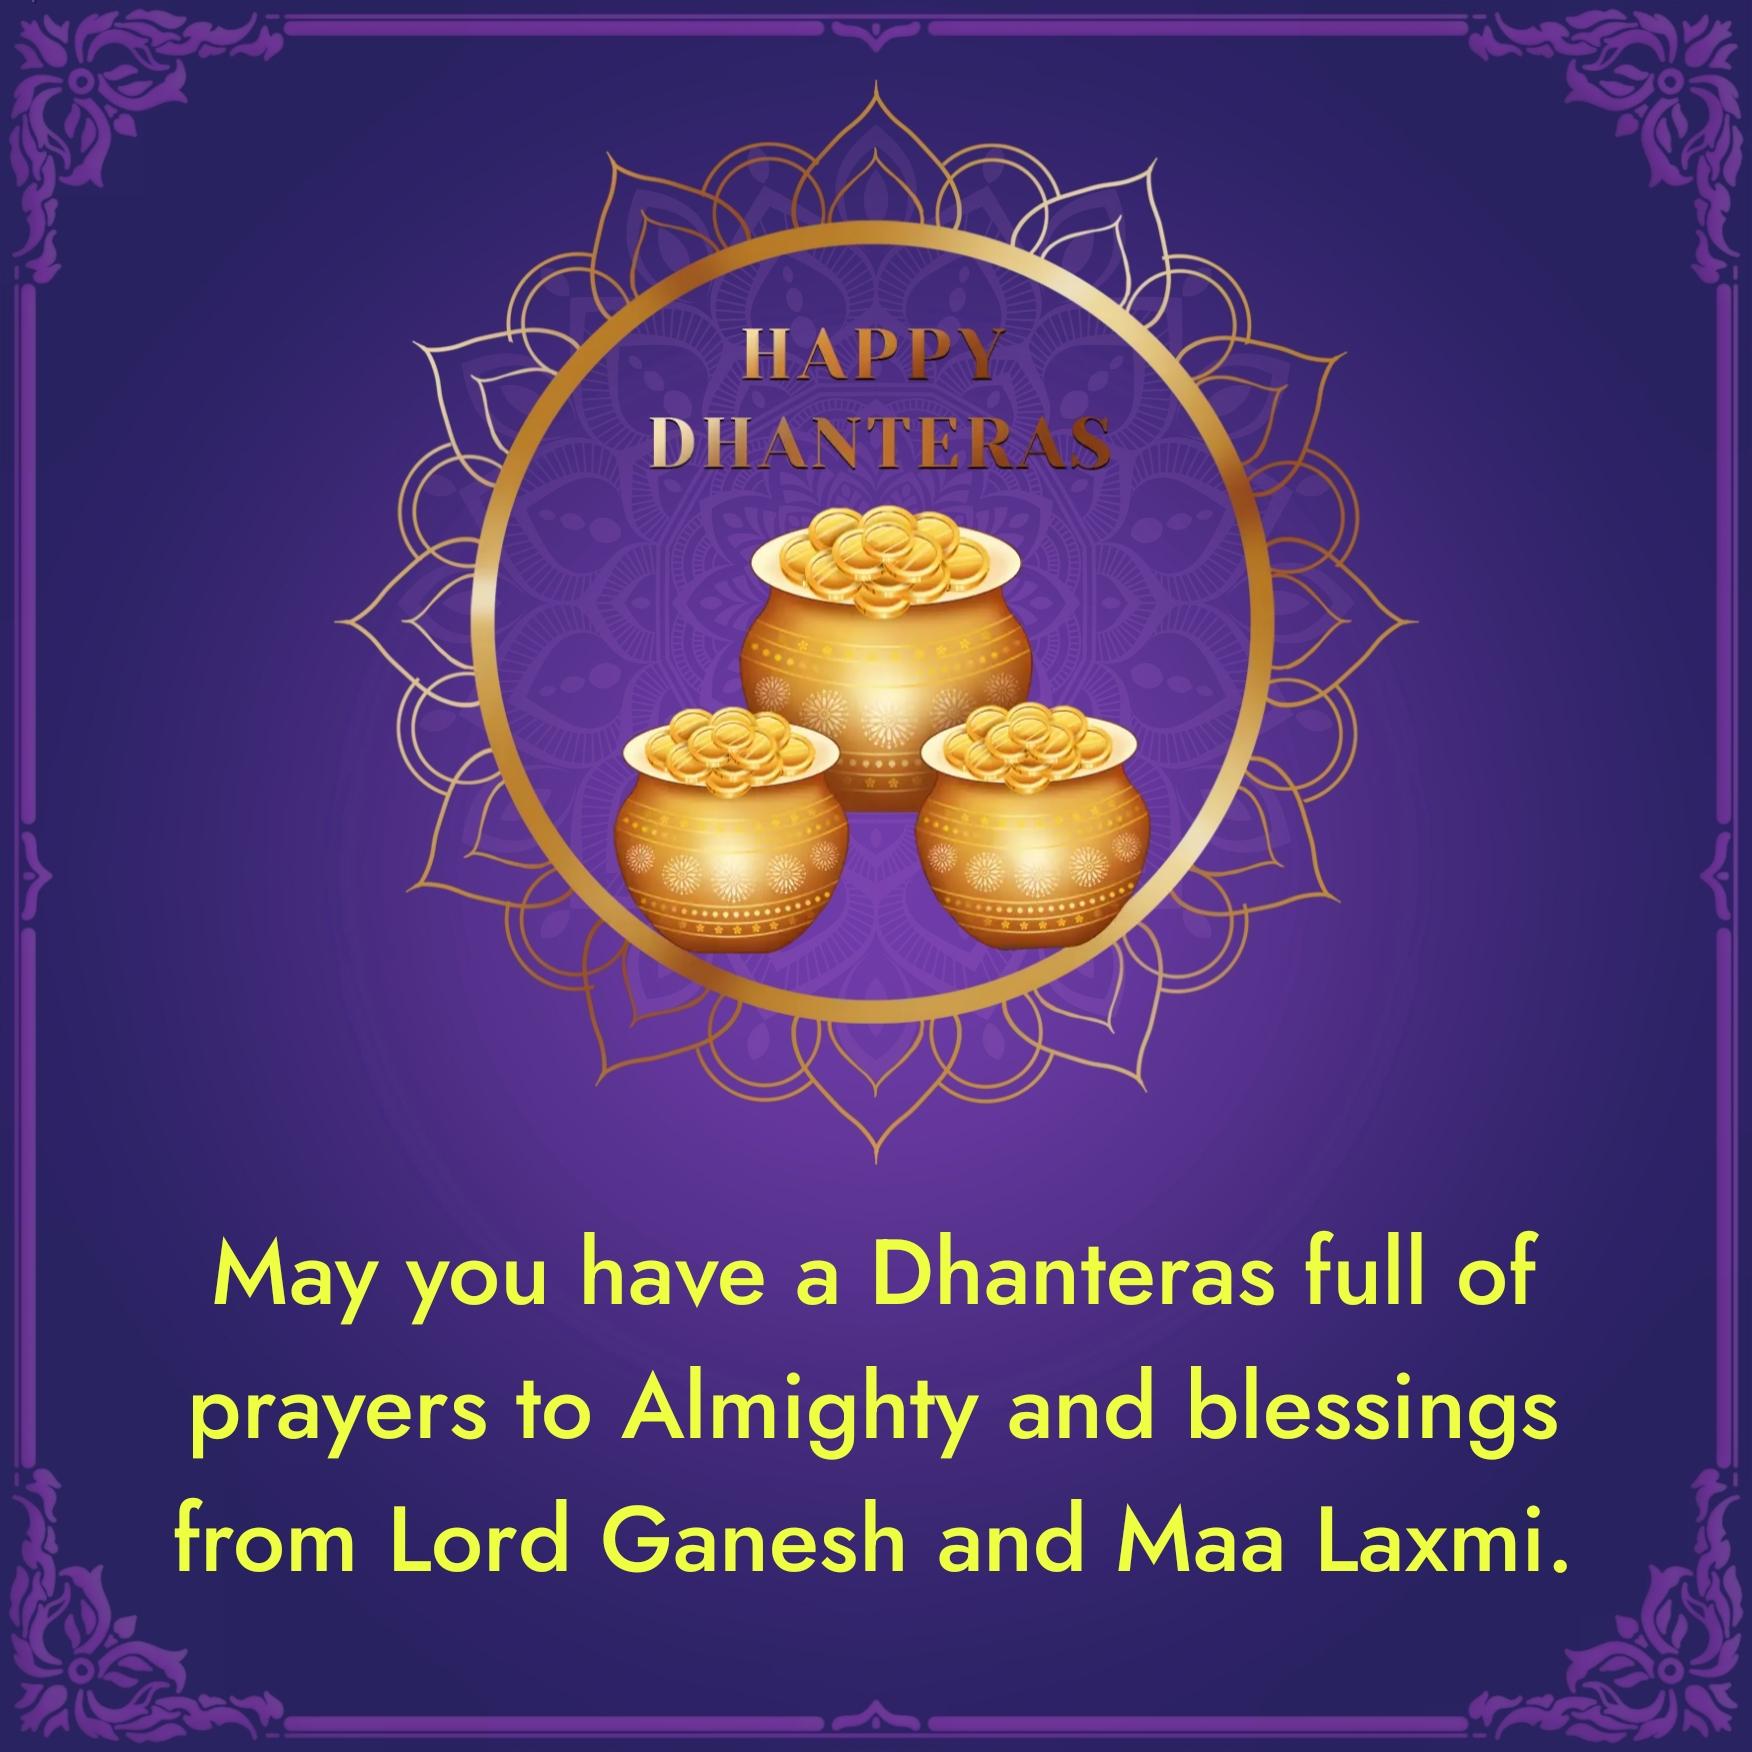 May you have a Dhanteras full of prayers